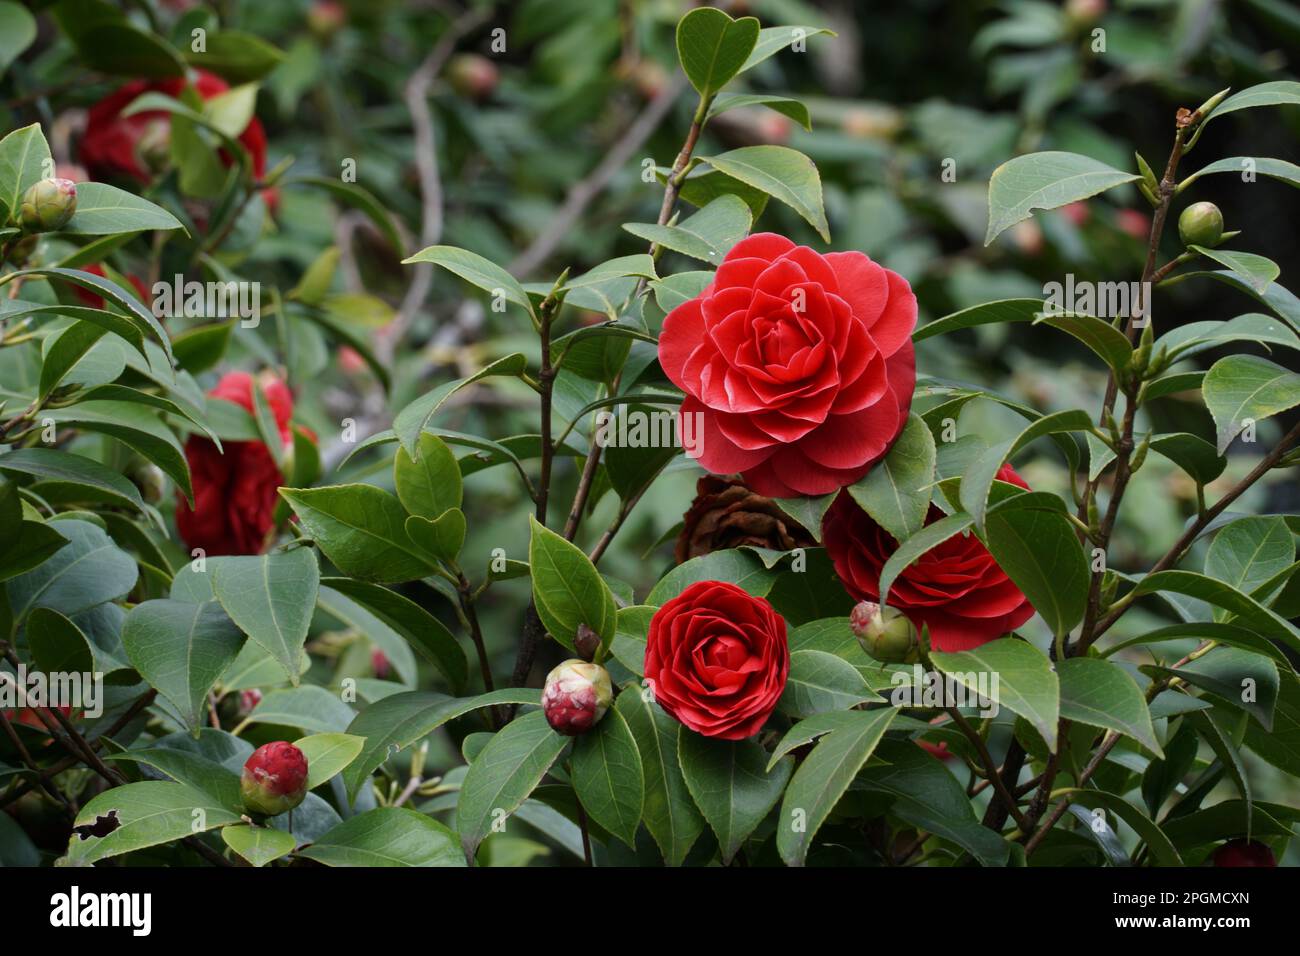 Nature background with bush of red flowering Camellia japonica bush Stock Photo